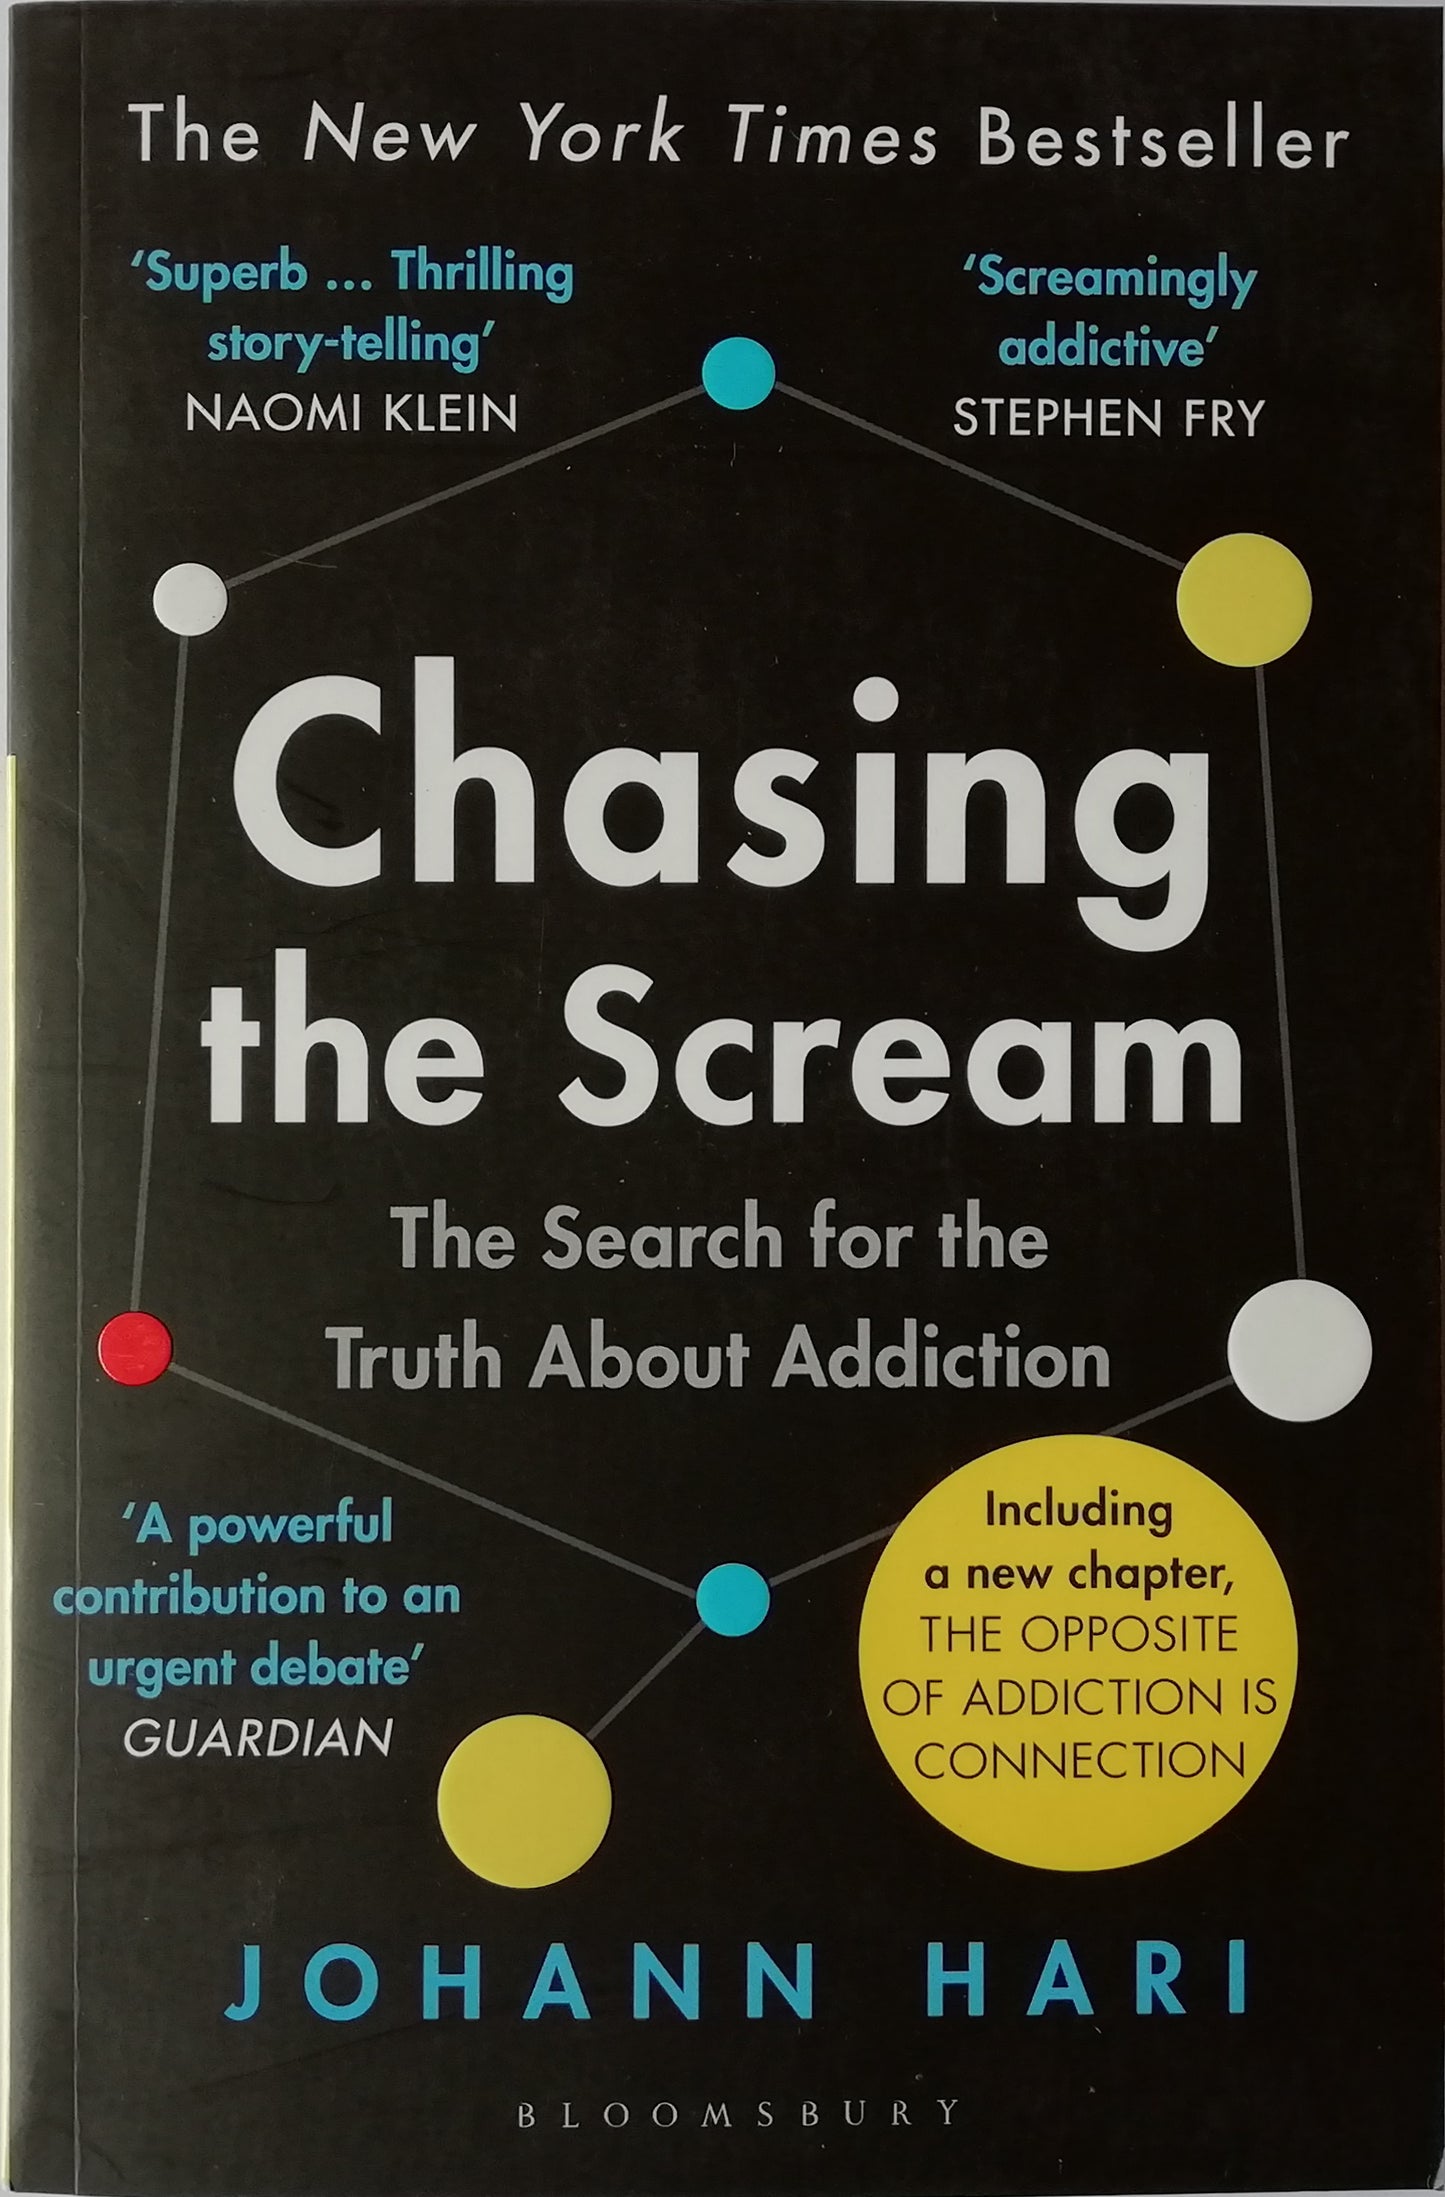 Chasing the Scream: The Search for the Truth About Addiction by Johann Hari